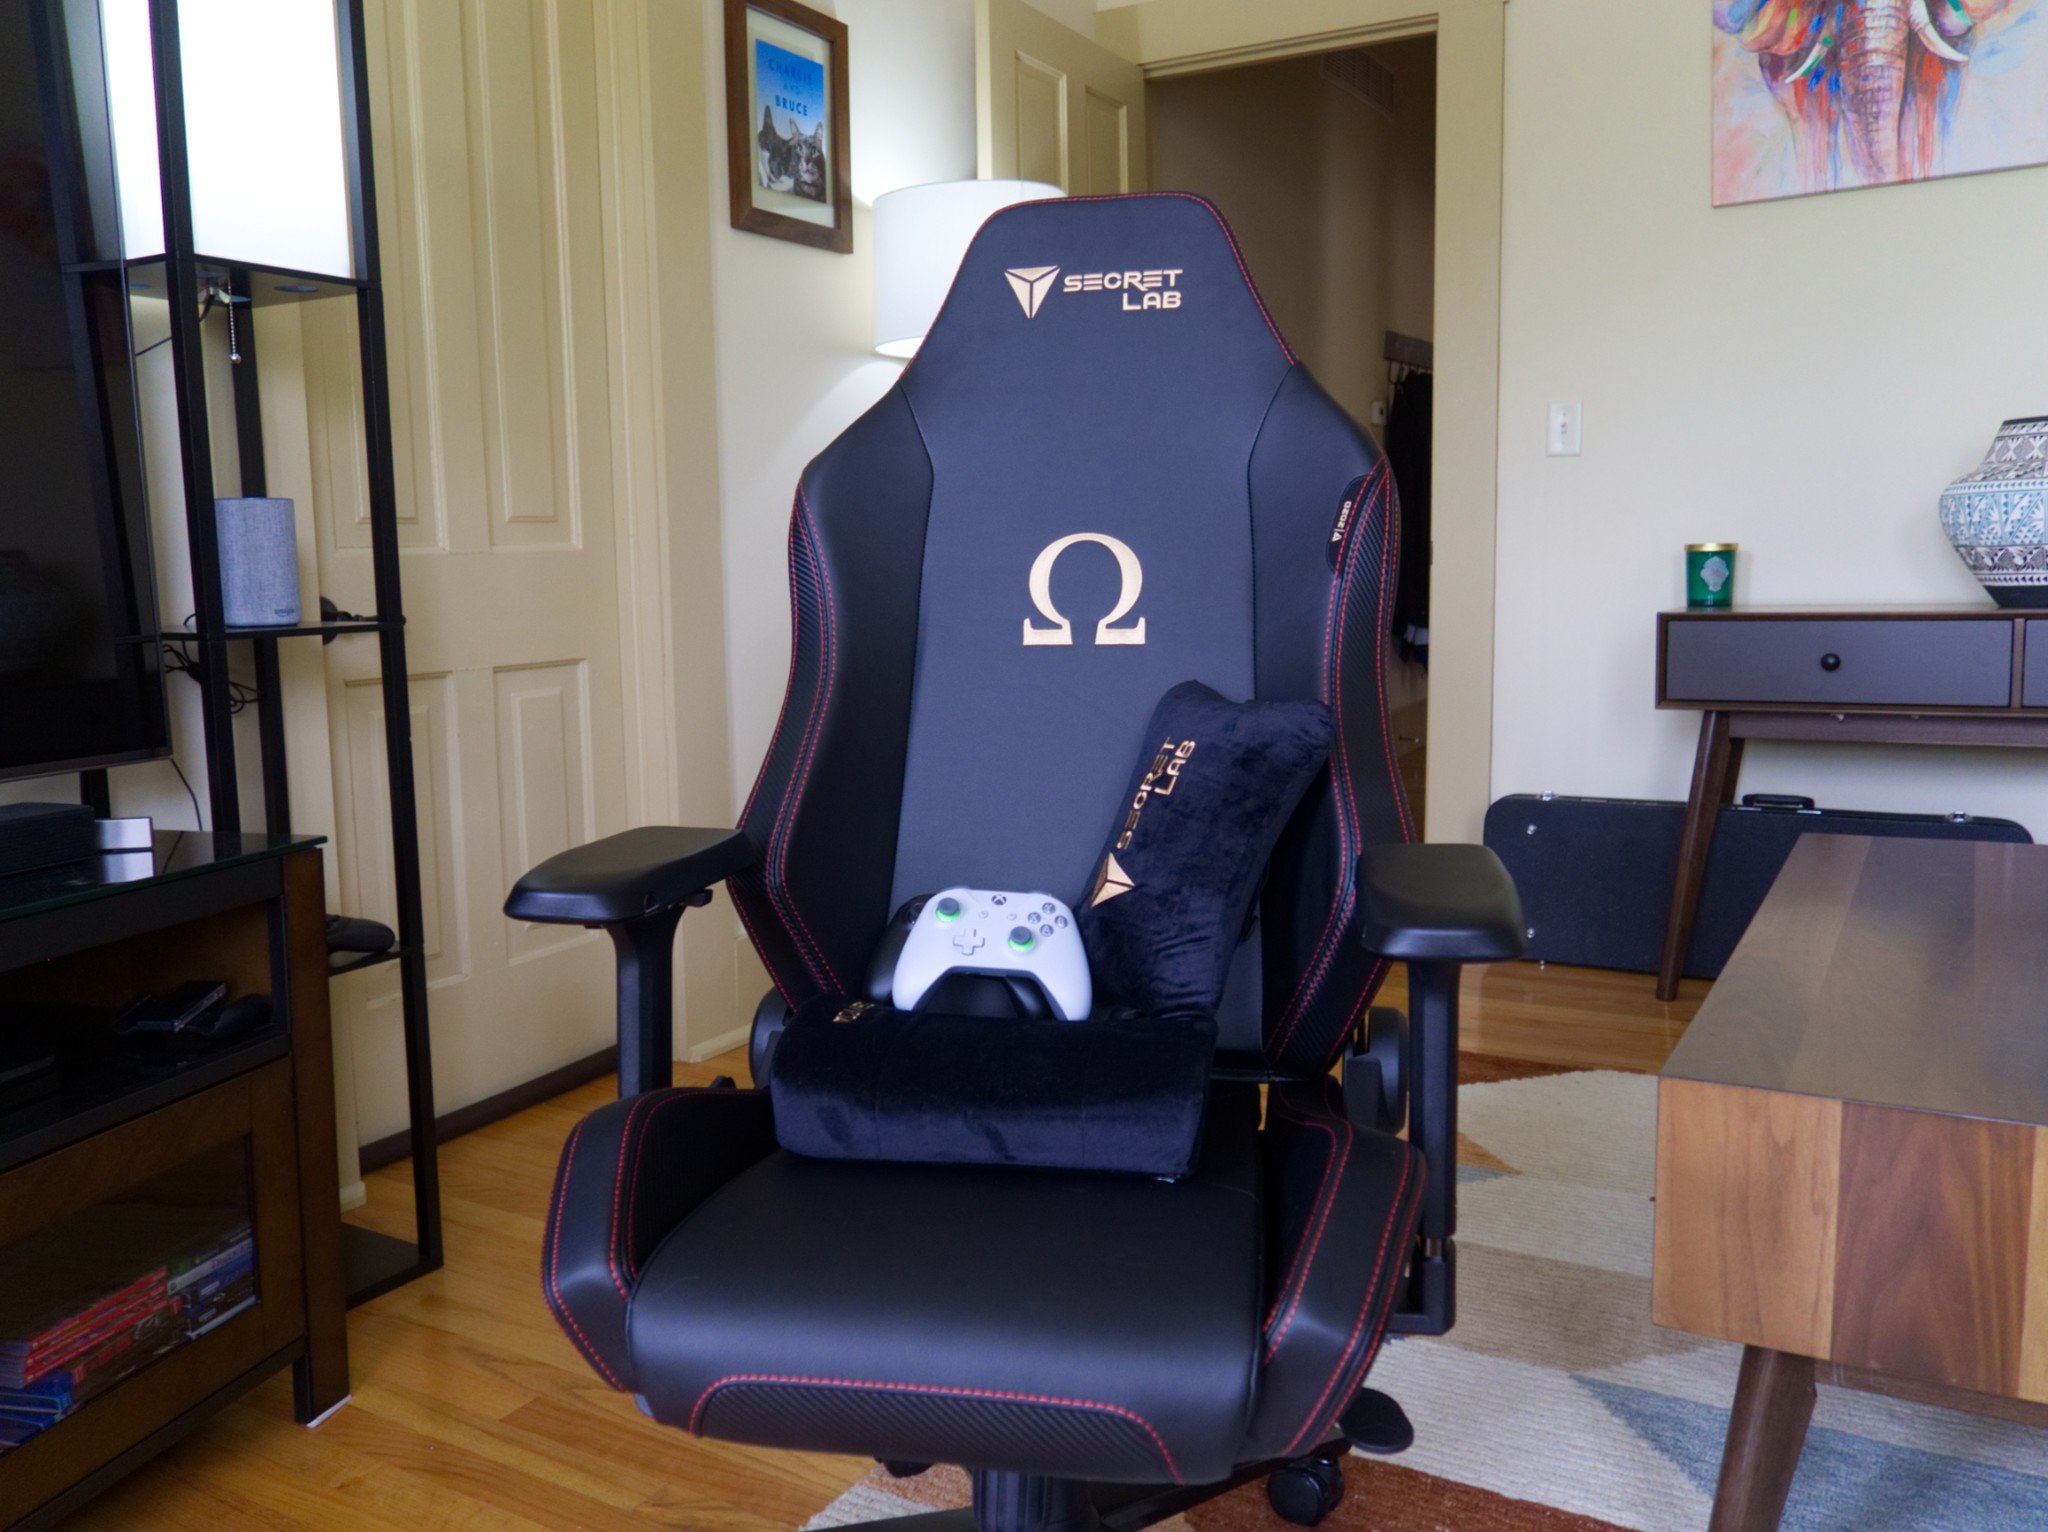 Secretlab 2020 Series gaming chair review: Small refinements equal